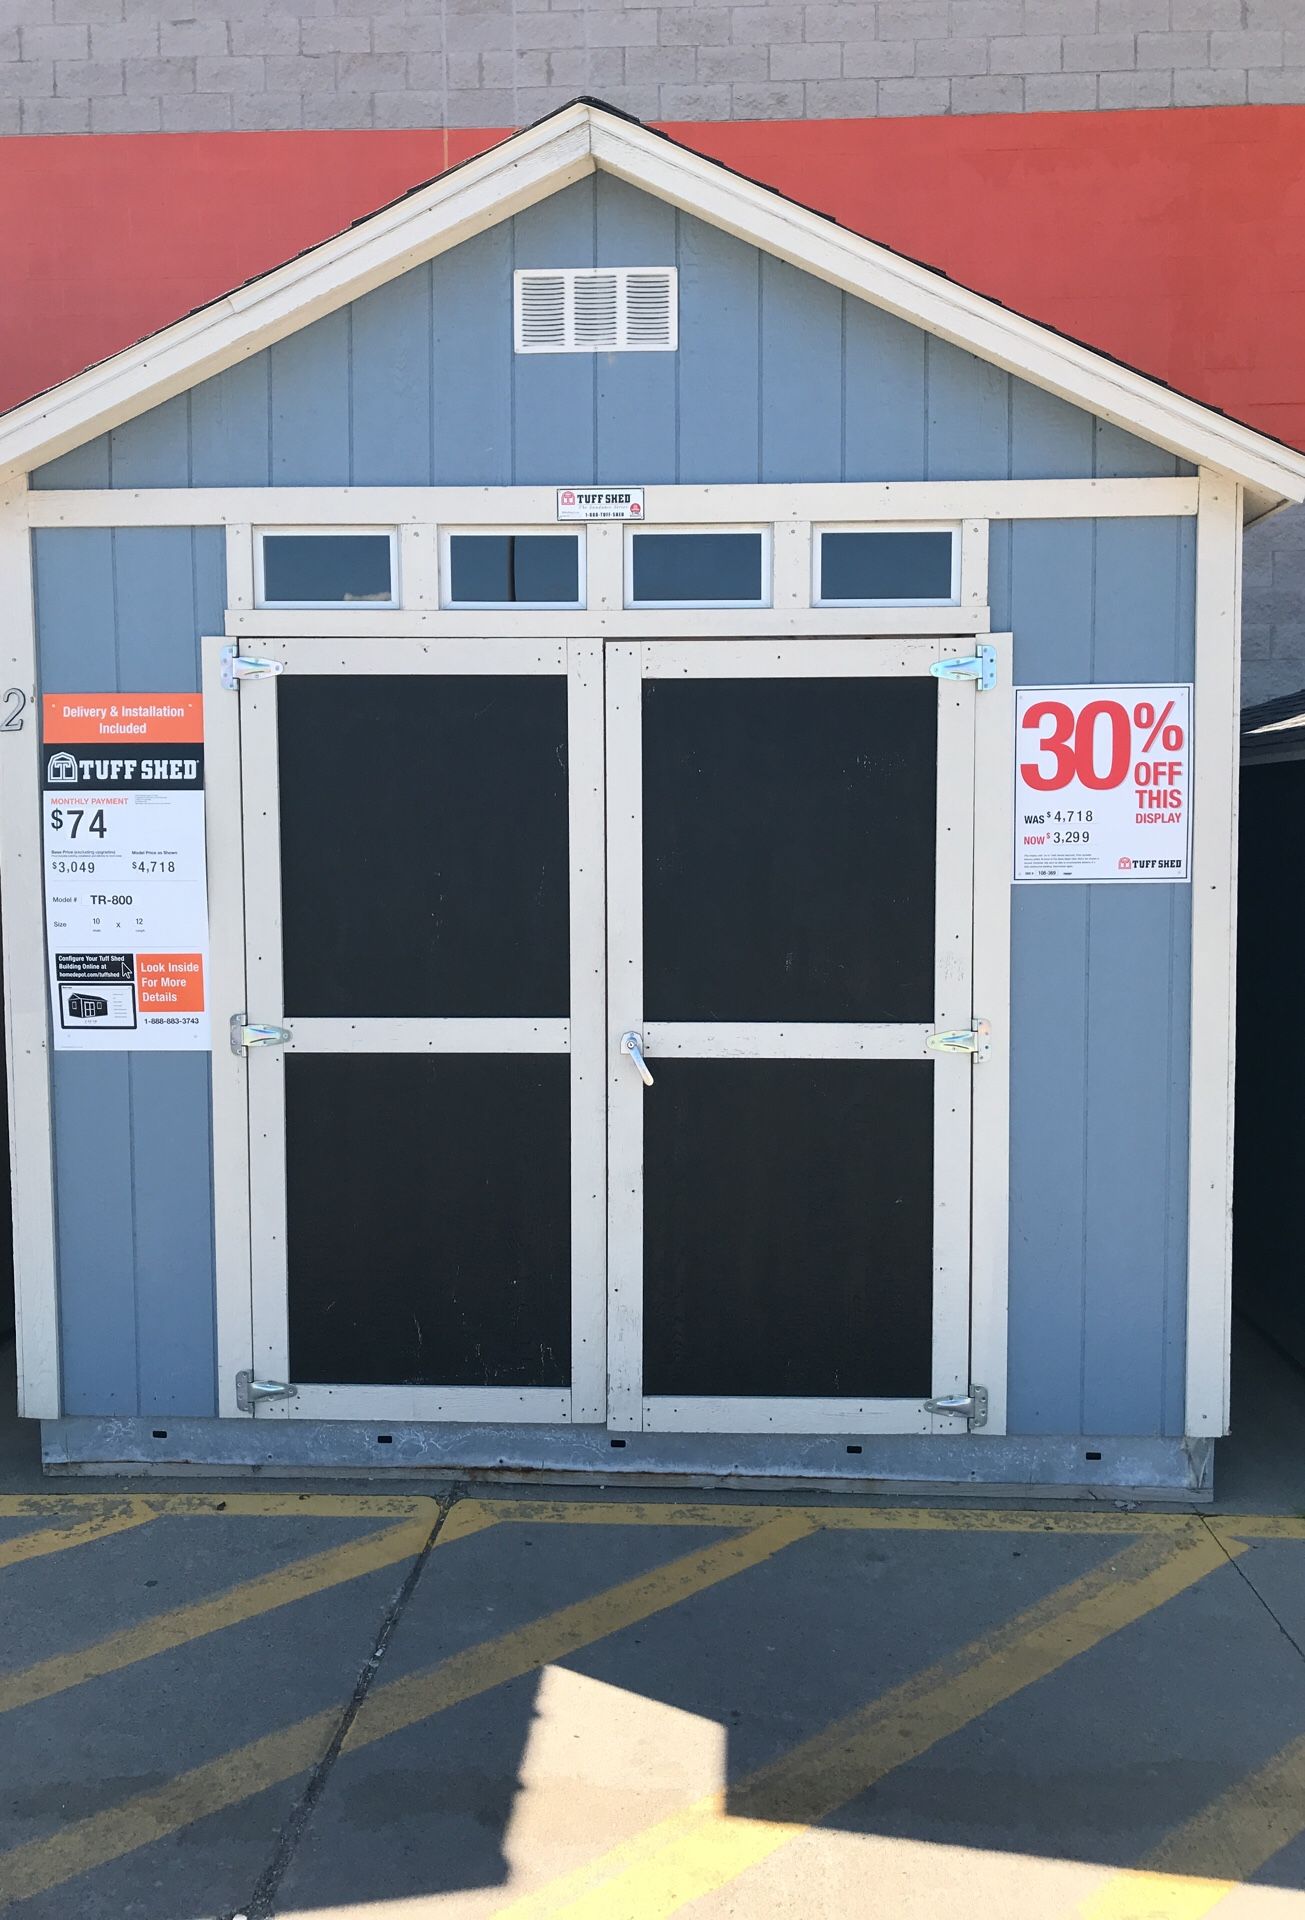 Tuff Shed tr800 10x12 former display was $4718 now $3299